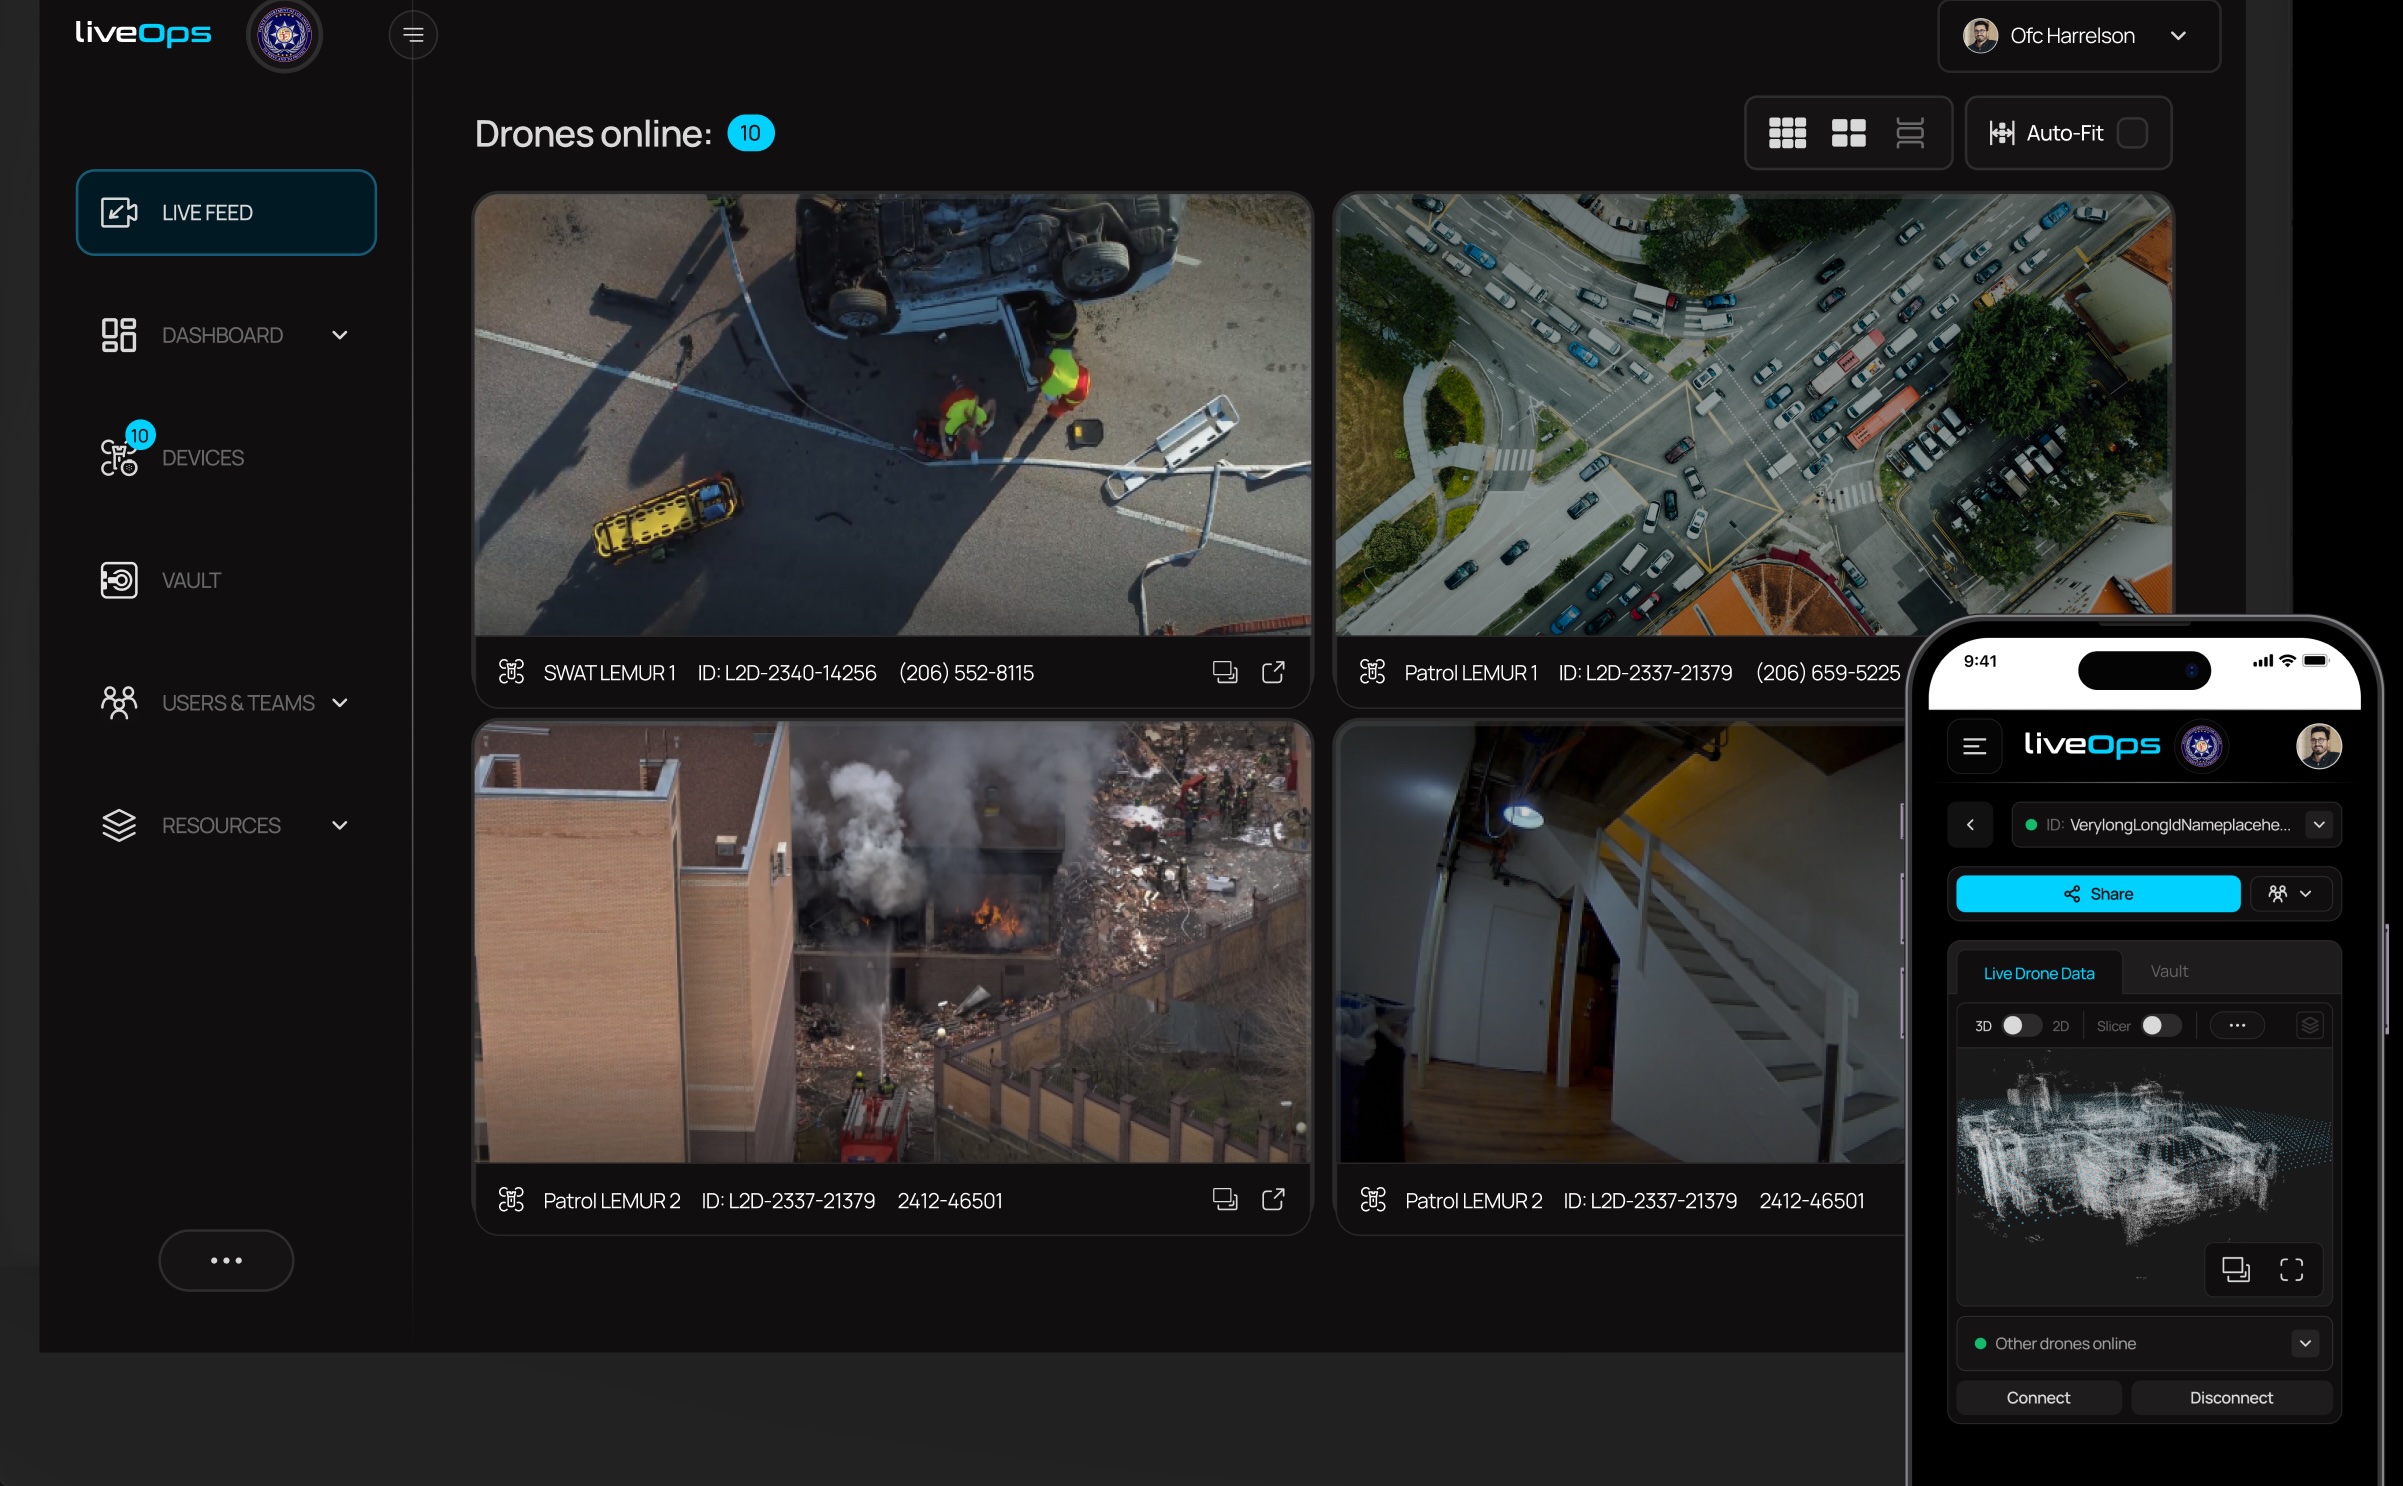 BRINC’s LiveOps platform unifies complete drone data feeds for police crisis response users